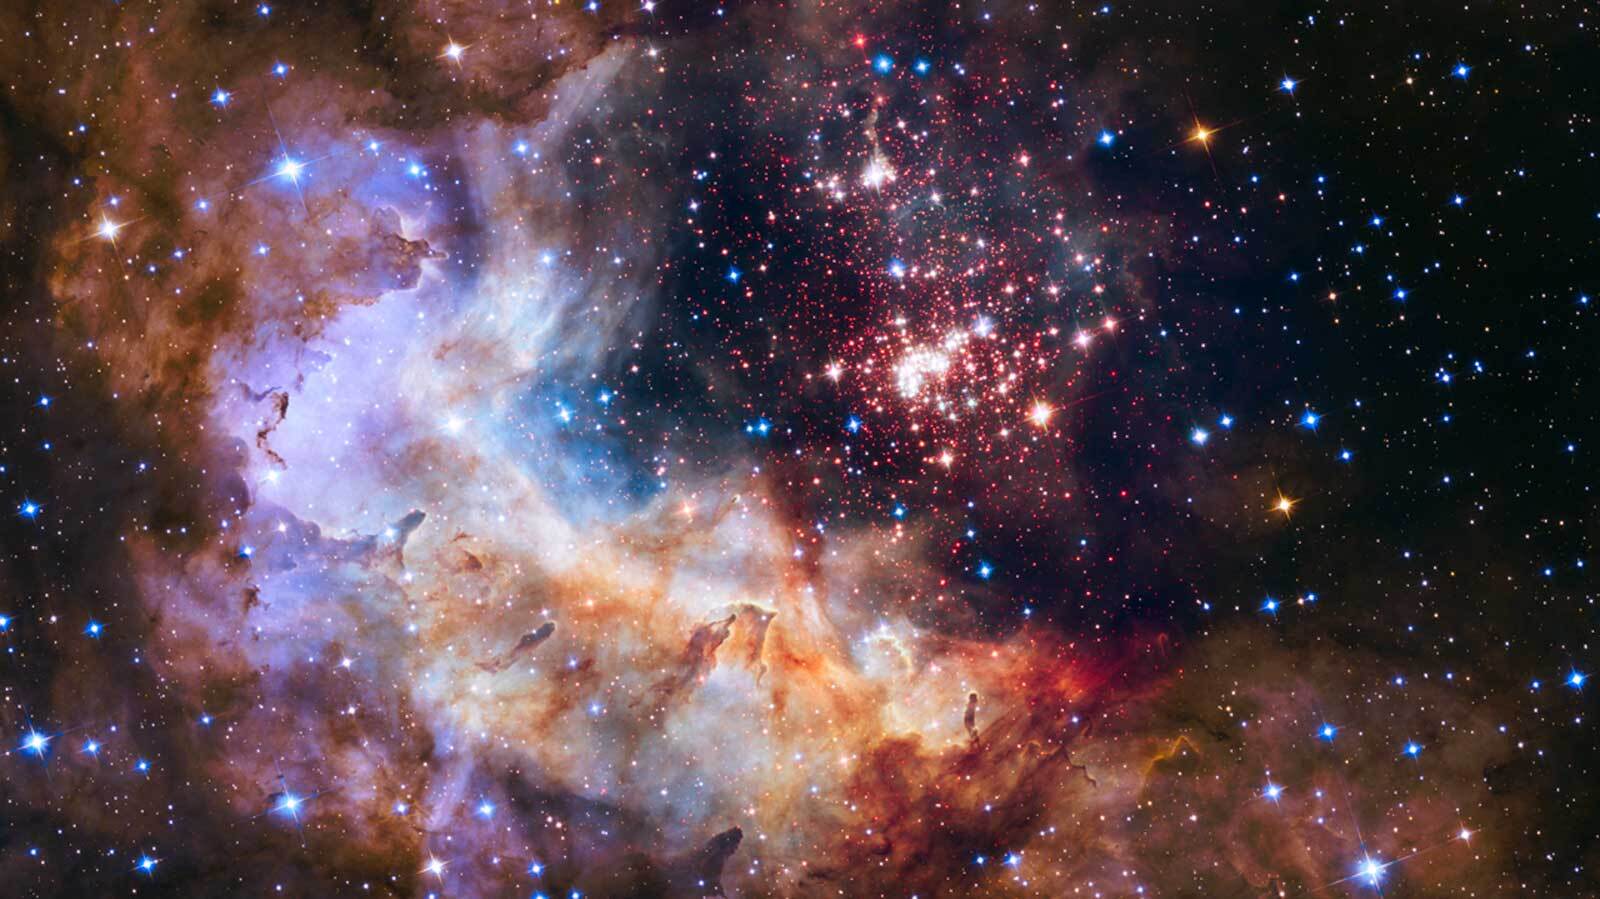 The brilliant tapestry of young stars flaring to life resembles a glittering fireworks display in this Hubble Space Telescope image. The sparkling centerpiece of this fireworks show is a giant cluster of thousands of stars called Westerlund 2. 